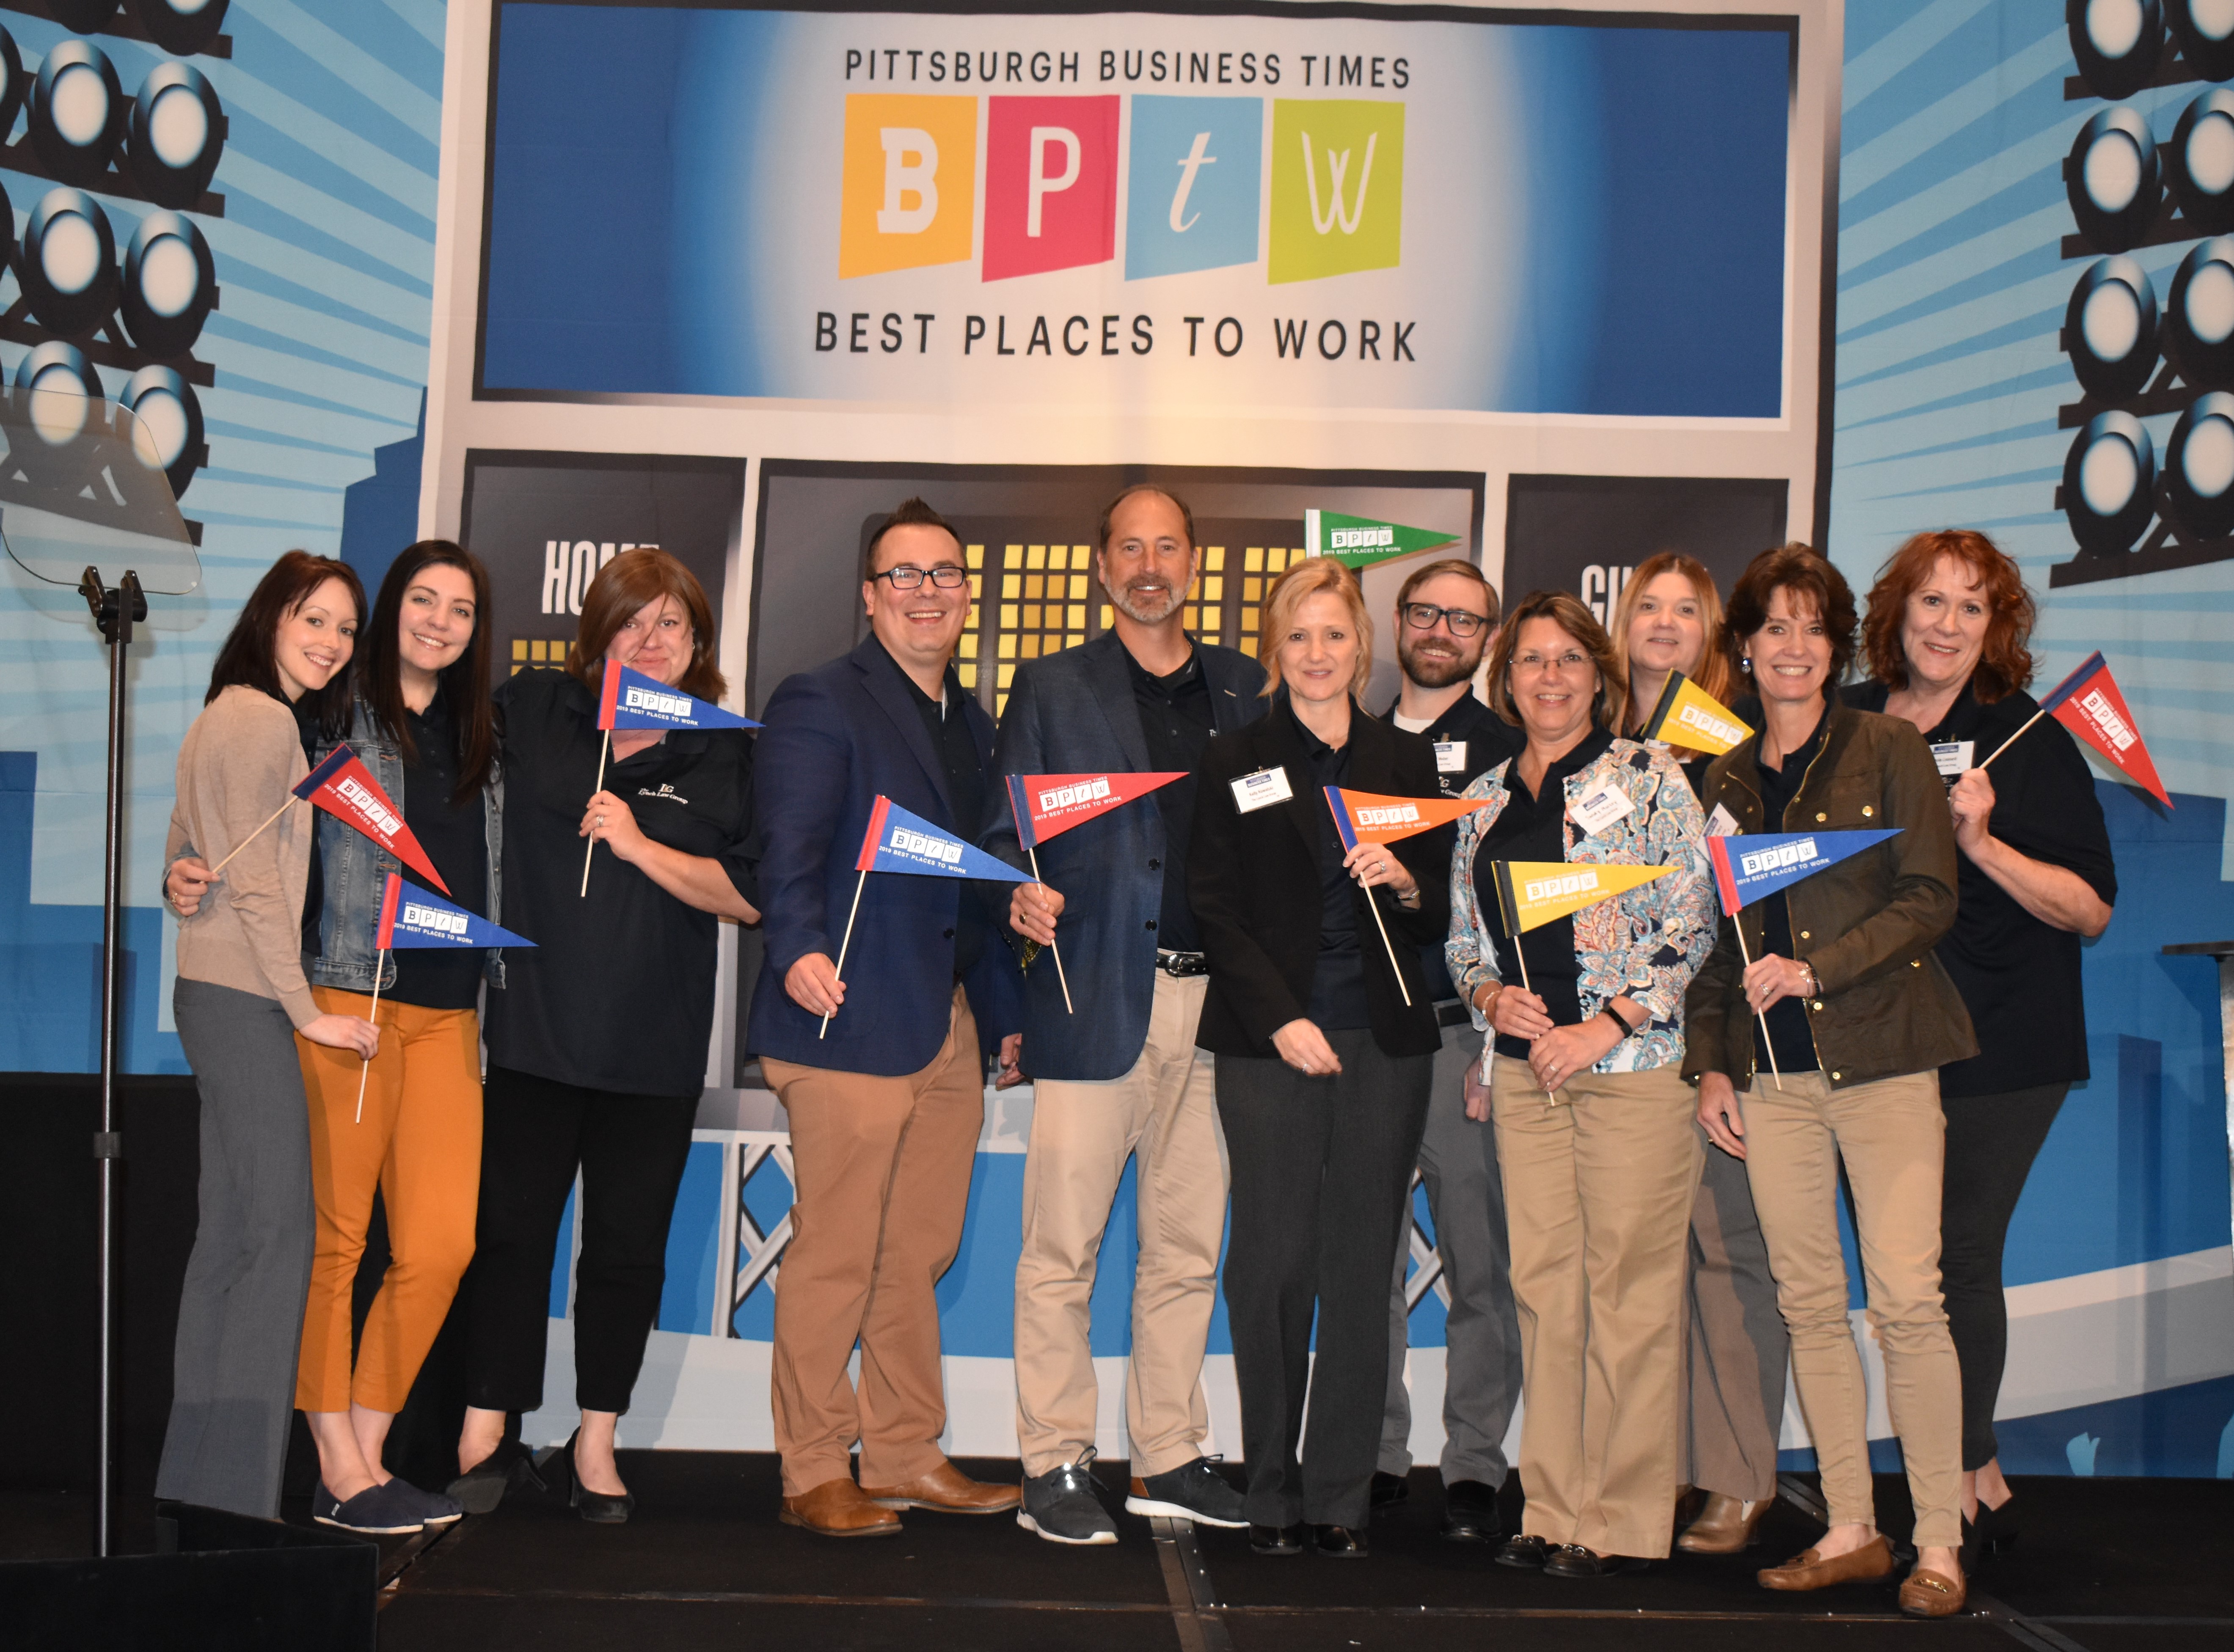 Best Places to Work in Pittsburgh - The Lynch Law Group